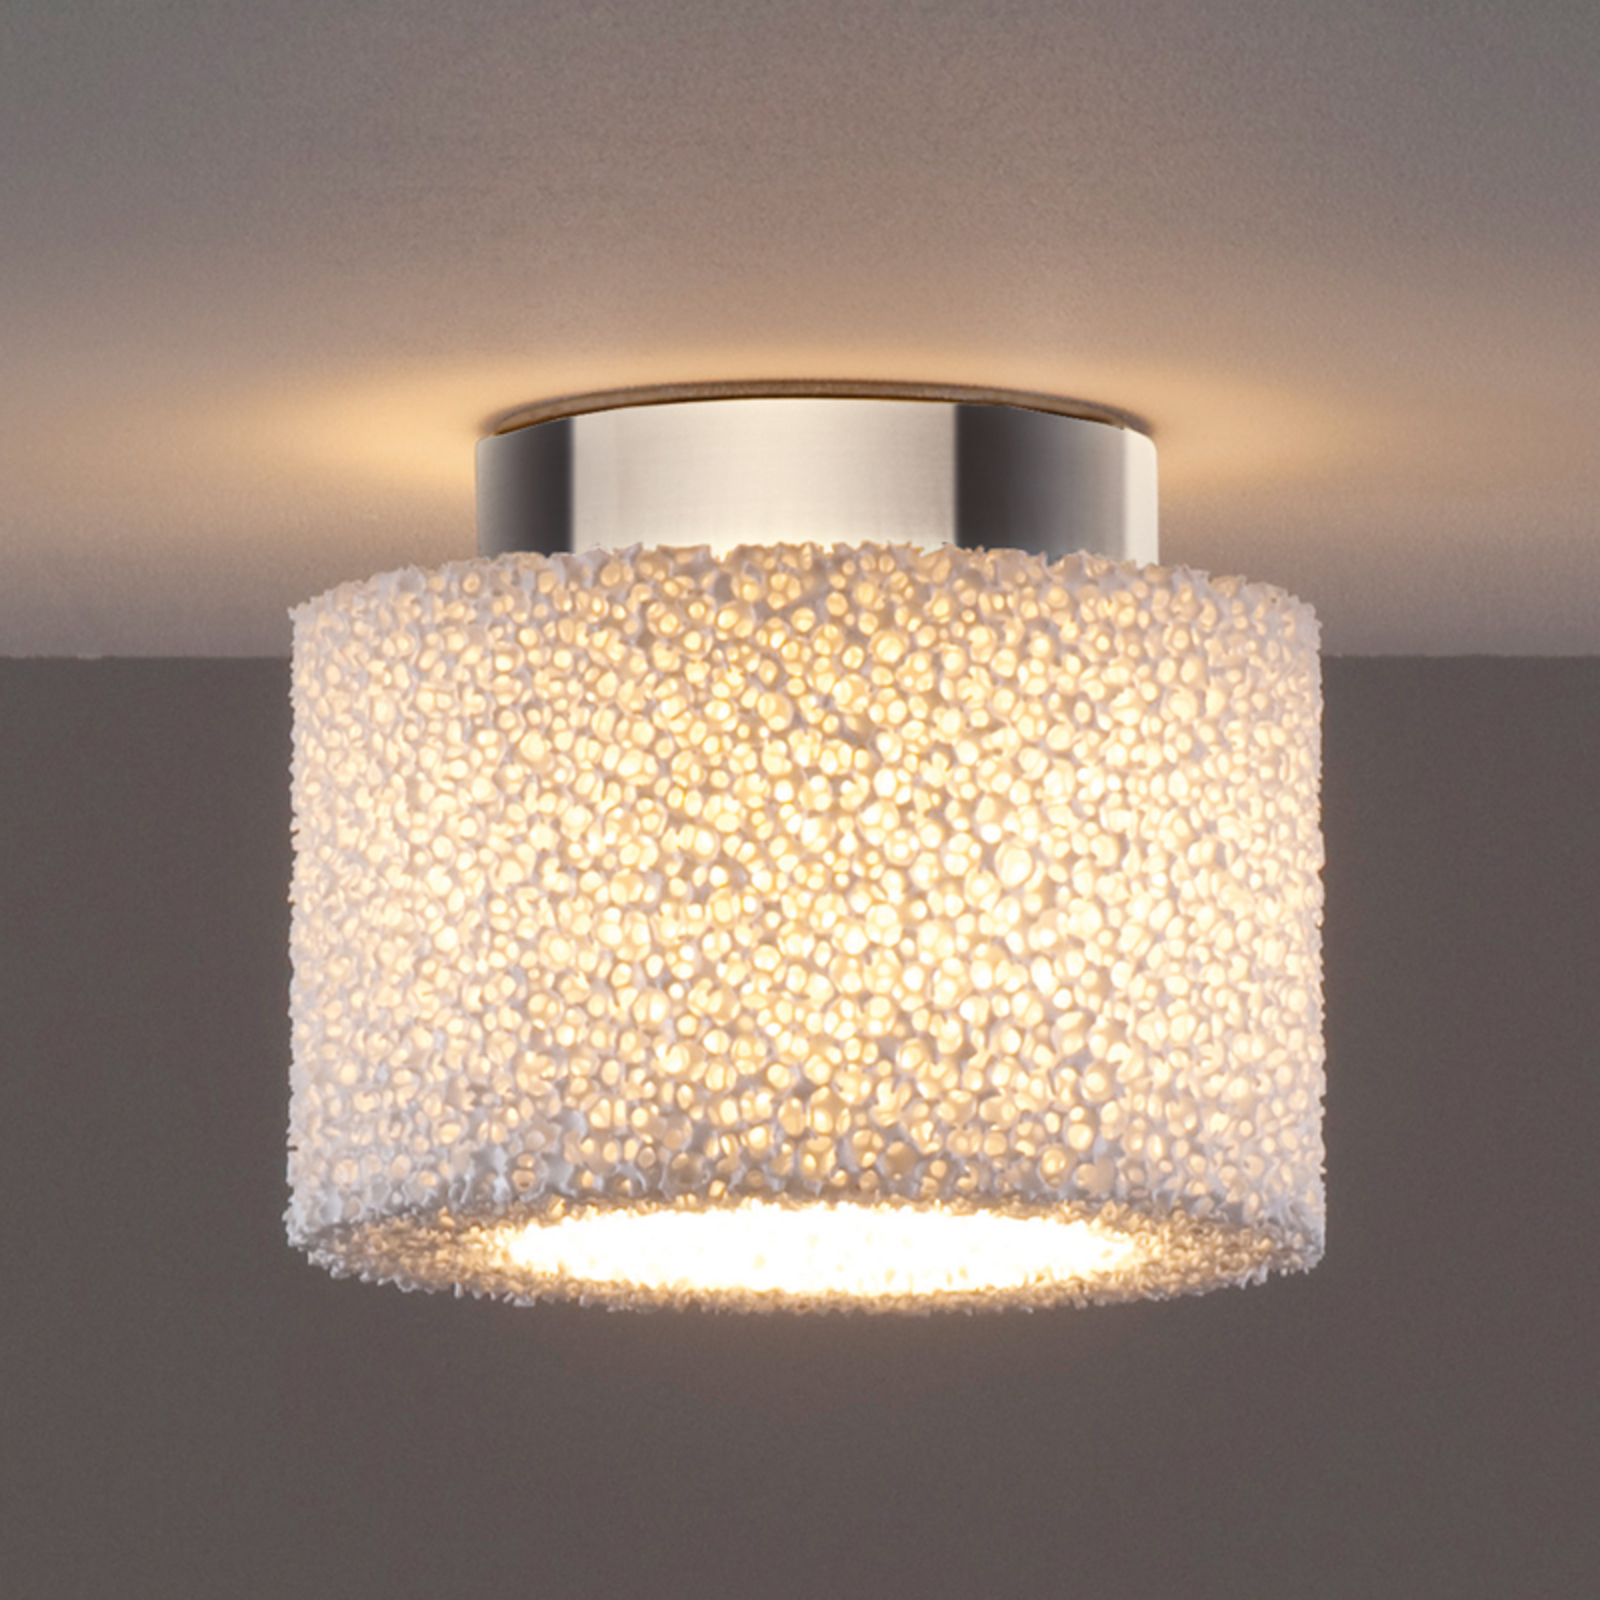 Reef - an LED ceiling light made from ceramic foam